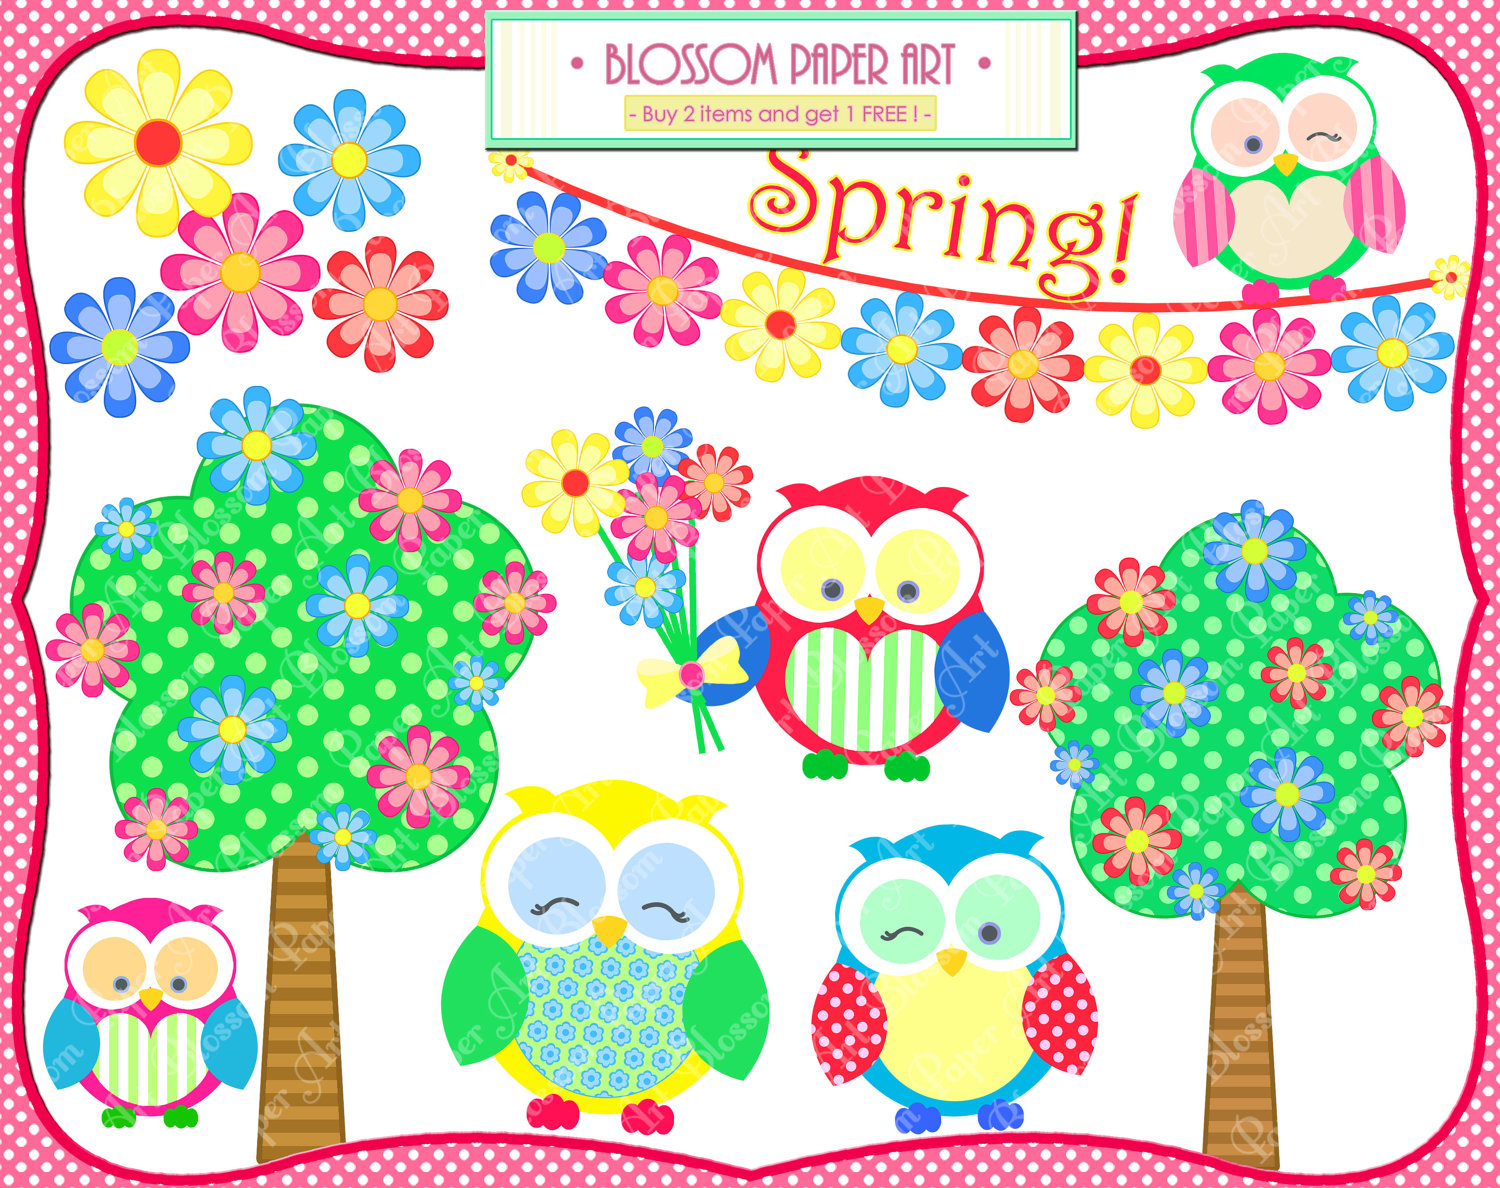 Owls Spring Clipart Flowers Trees Bunting By Blossompaperart